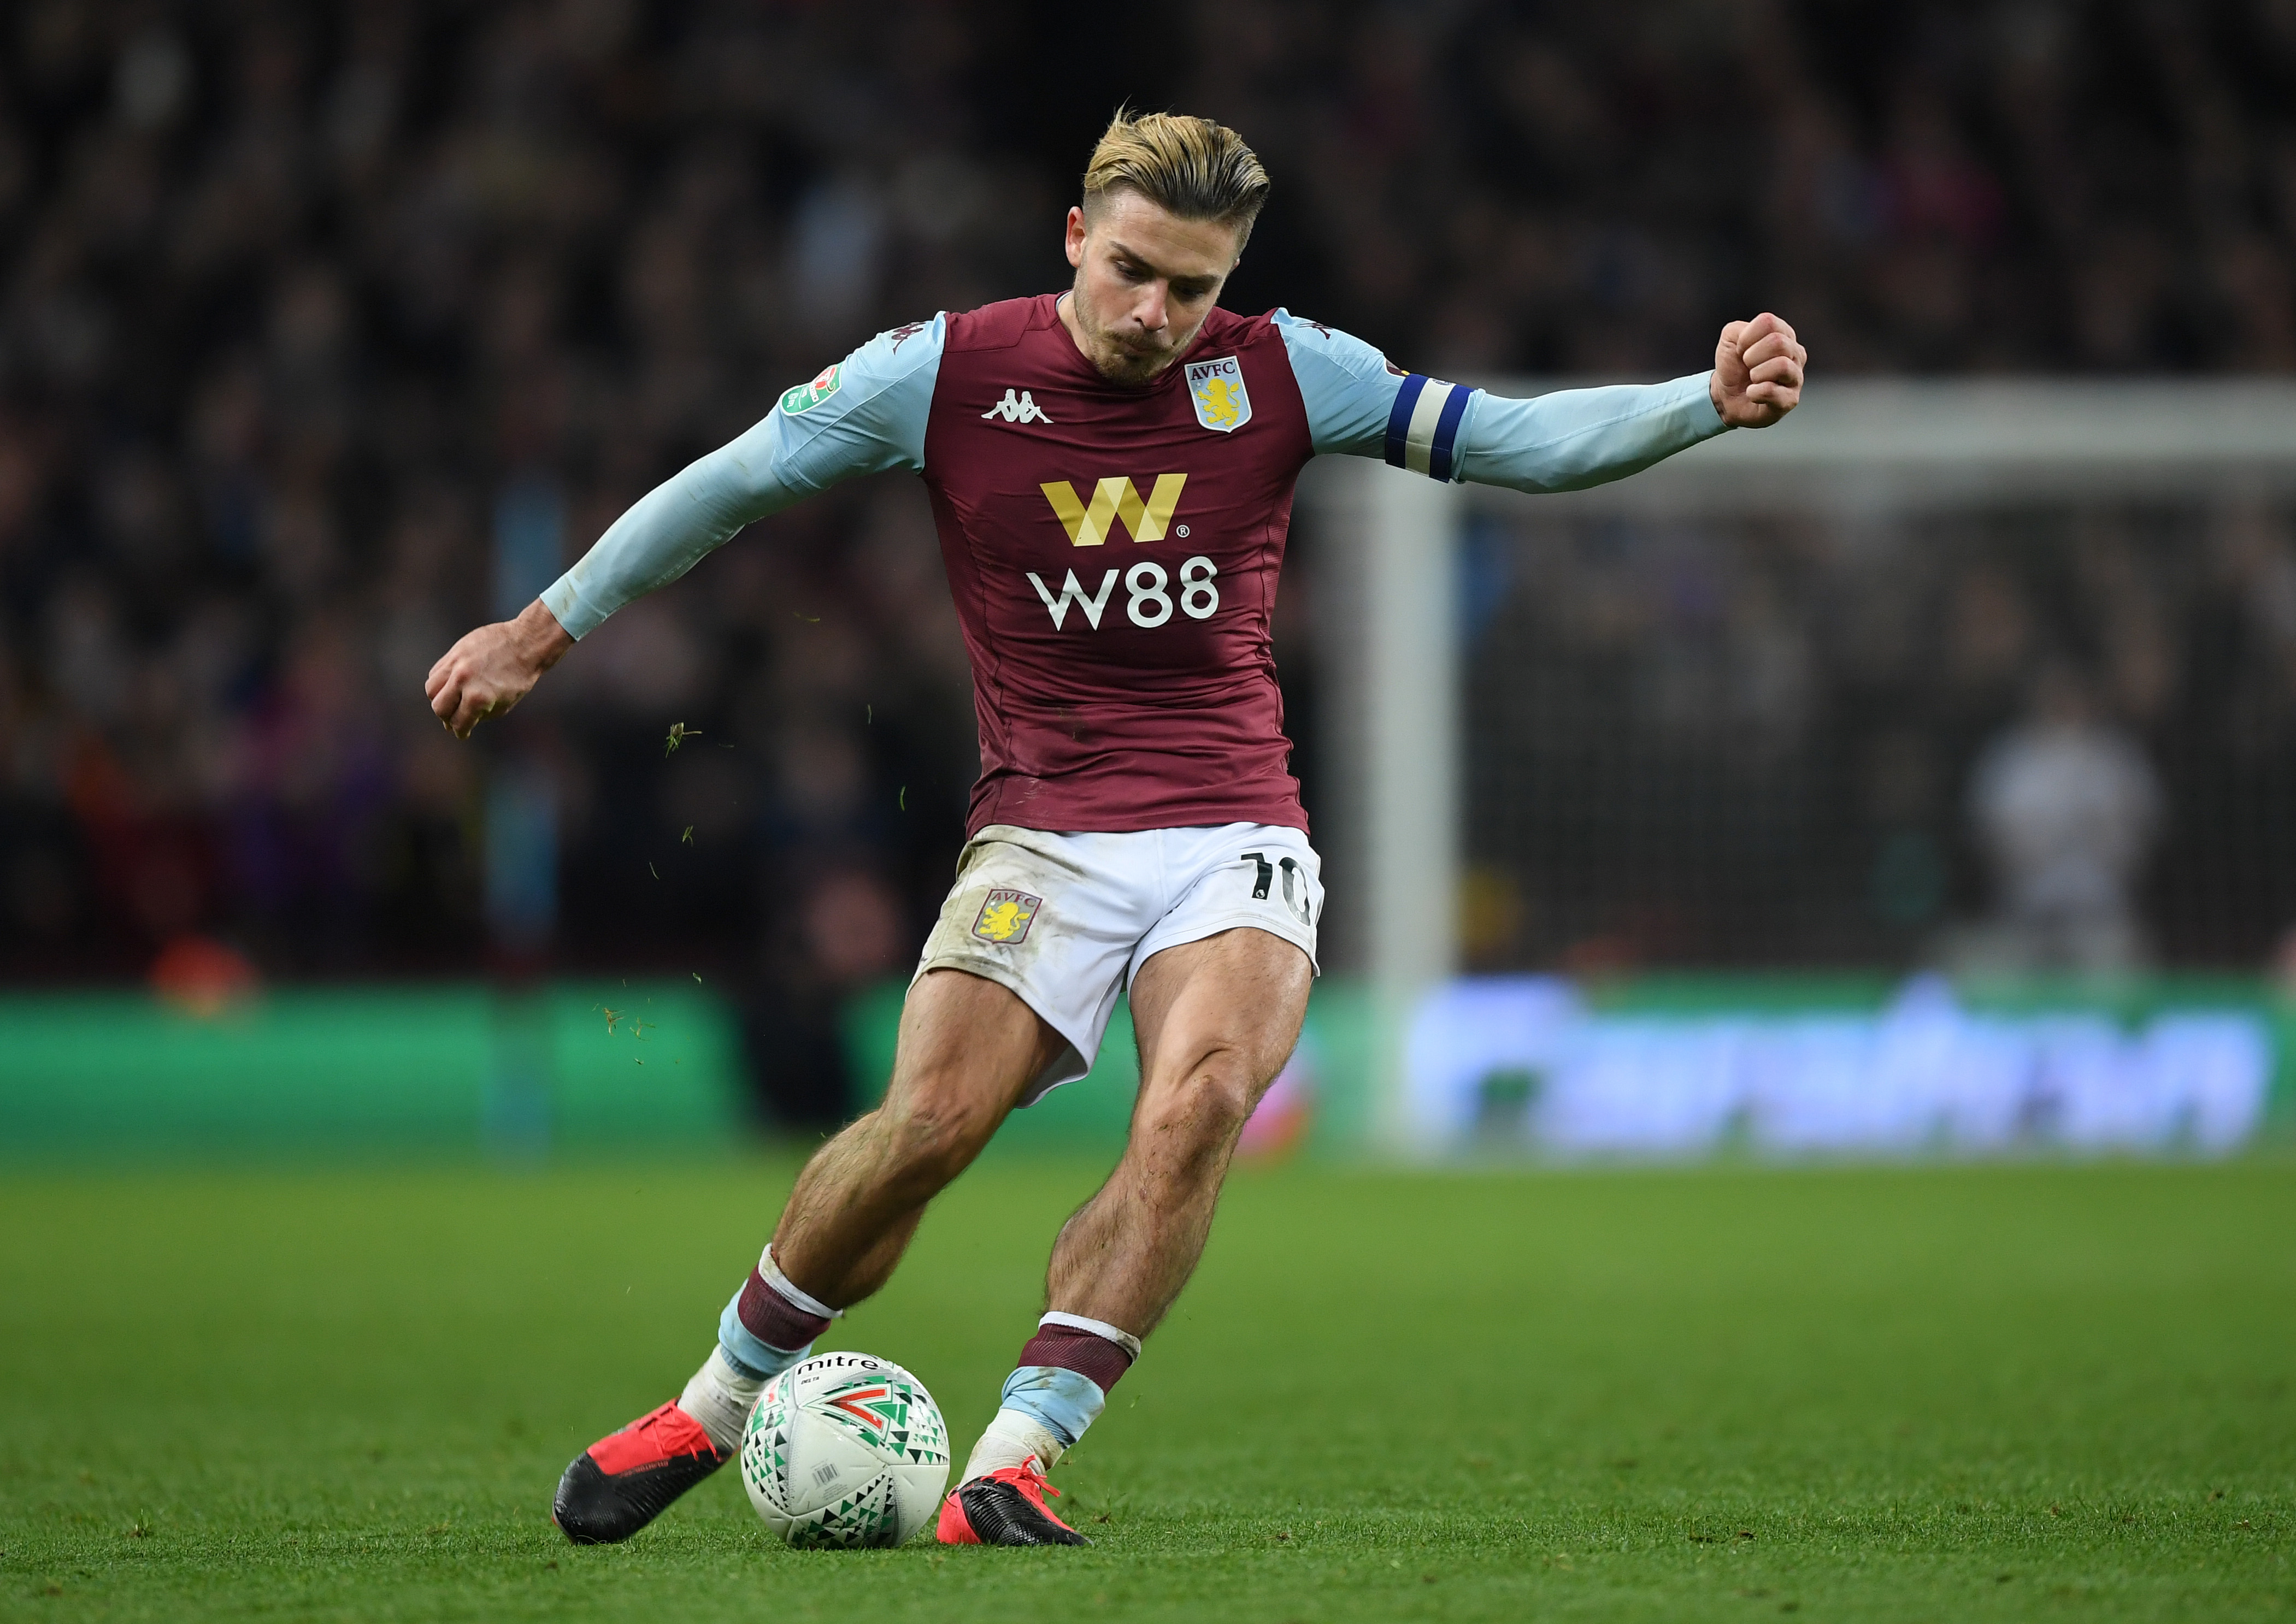 Jack Grealish will be key for Aston Villa against Arsenal (Photo by Shaun Botterill/Getty Images)